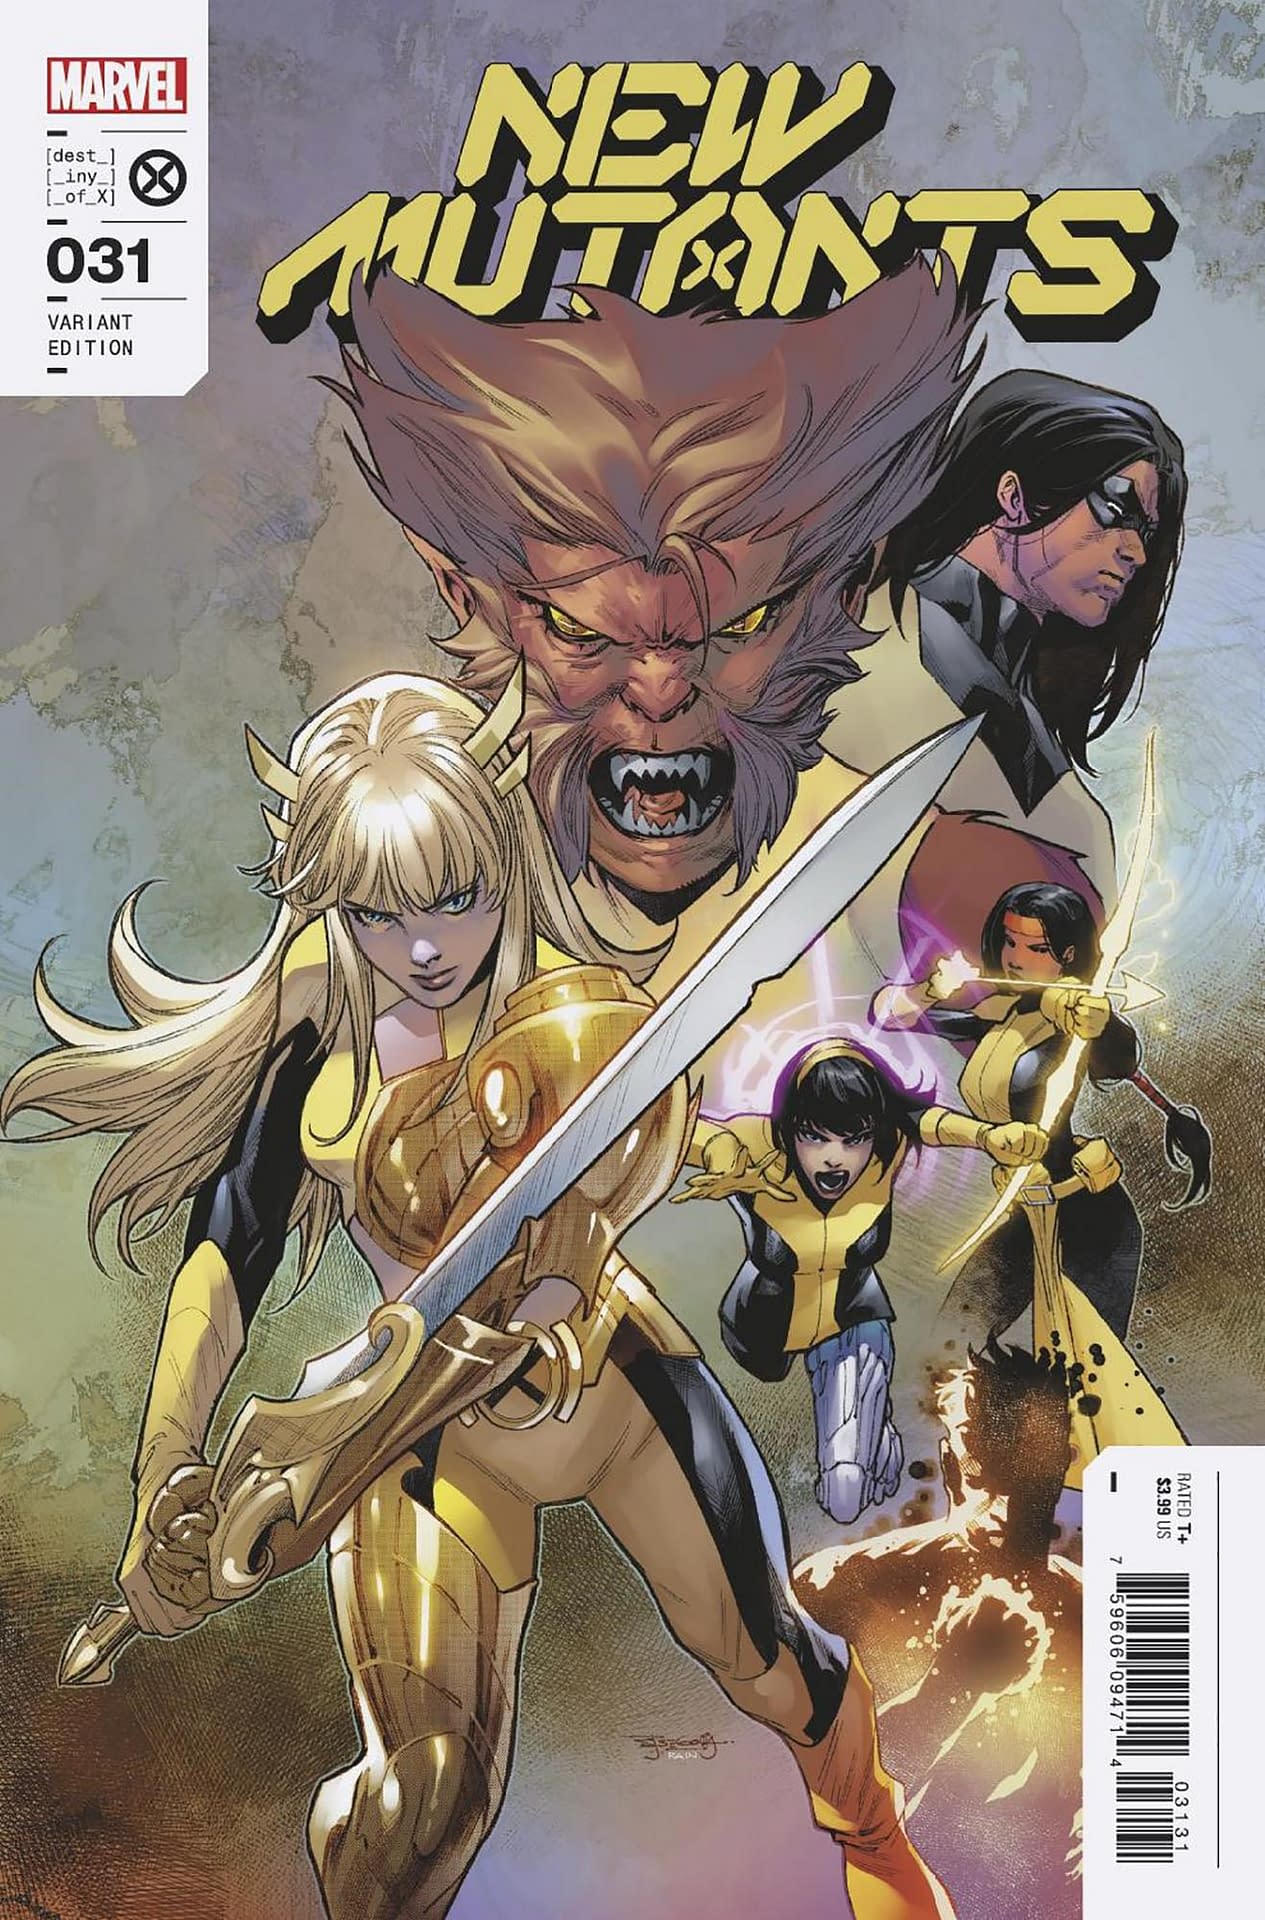 Marvel - Welcome to the New Mutants, Escapadehope you